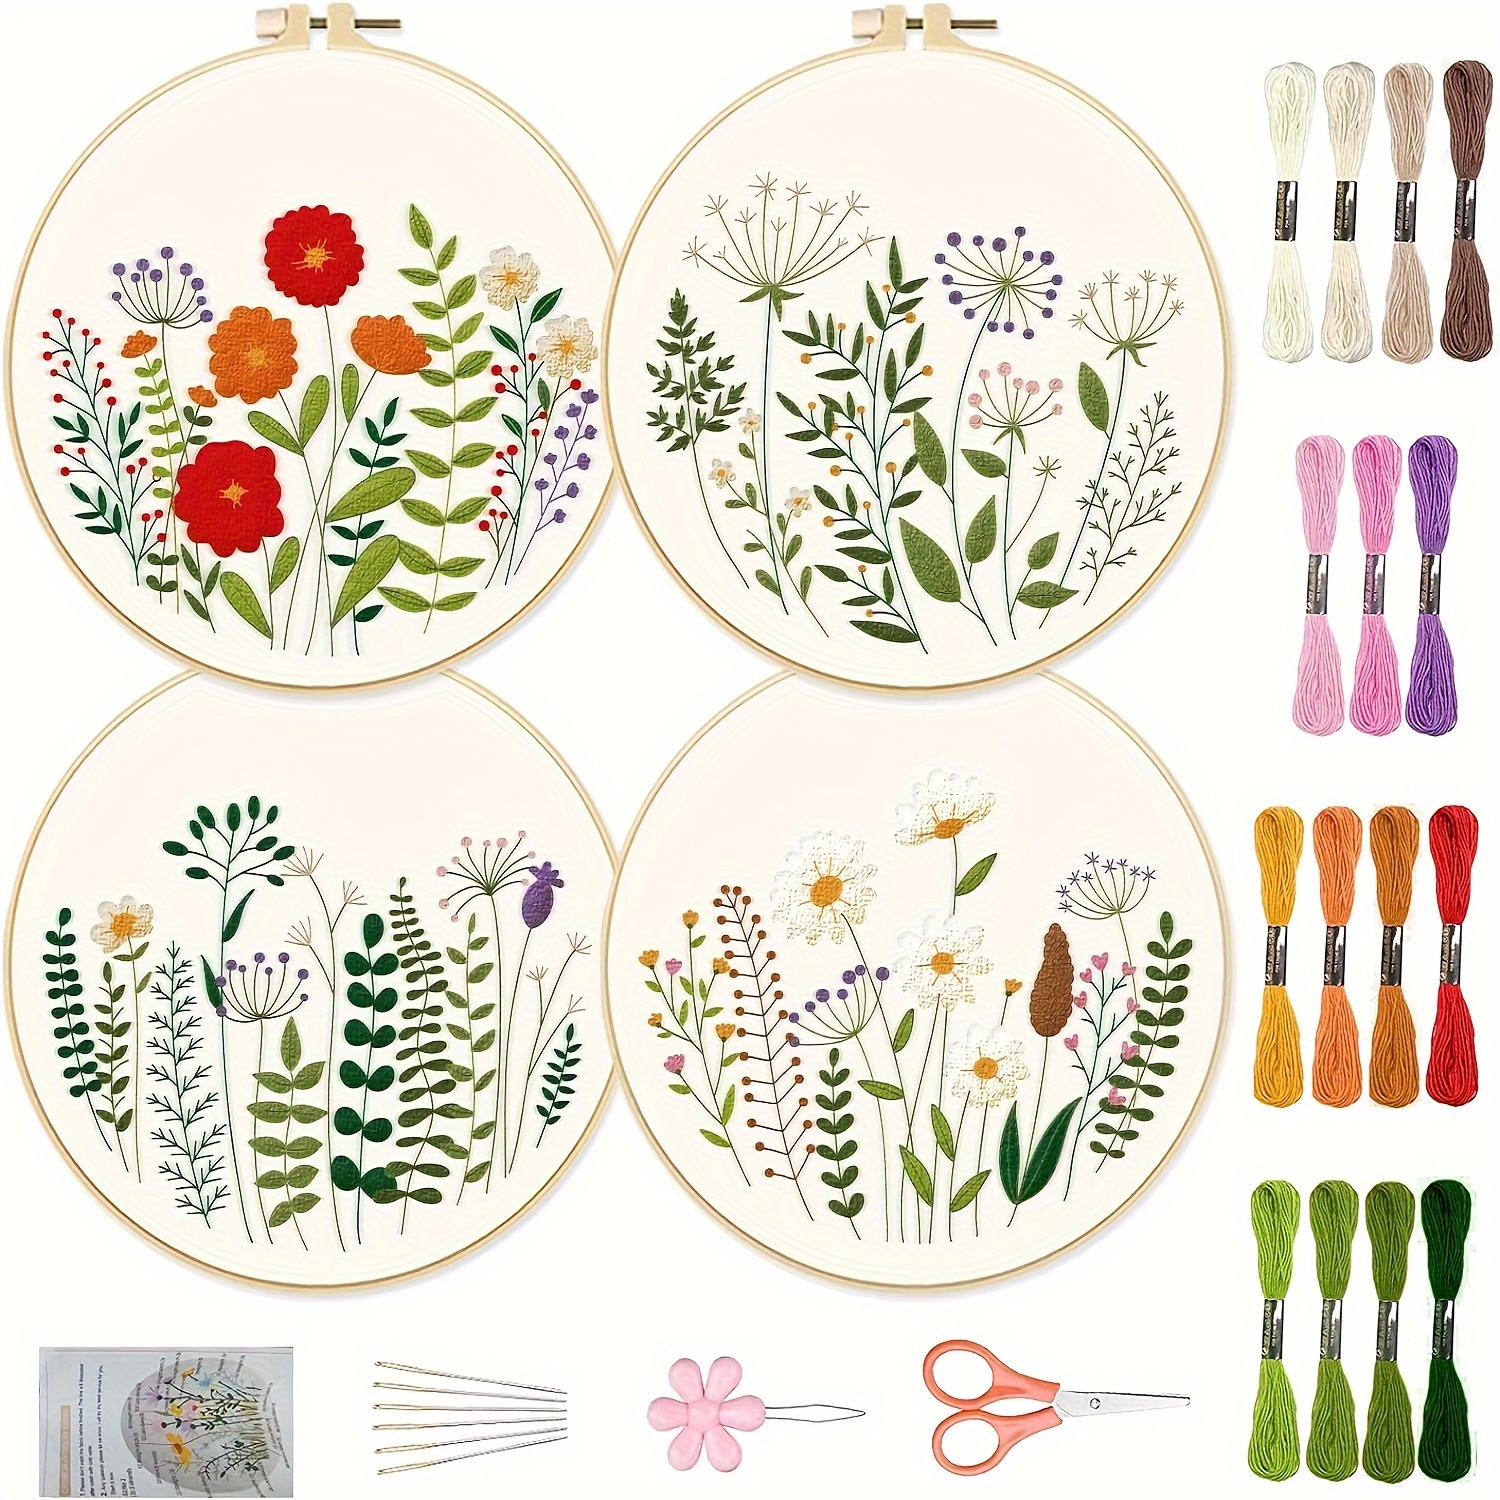 

4pcs Embroidery Set, Embroidery Botanical Floral Print With Instructions, Suitable For Adult Beginners Diy Embroidery Kit Adult Holiday Gift (embroidery Tools Color Random)